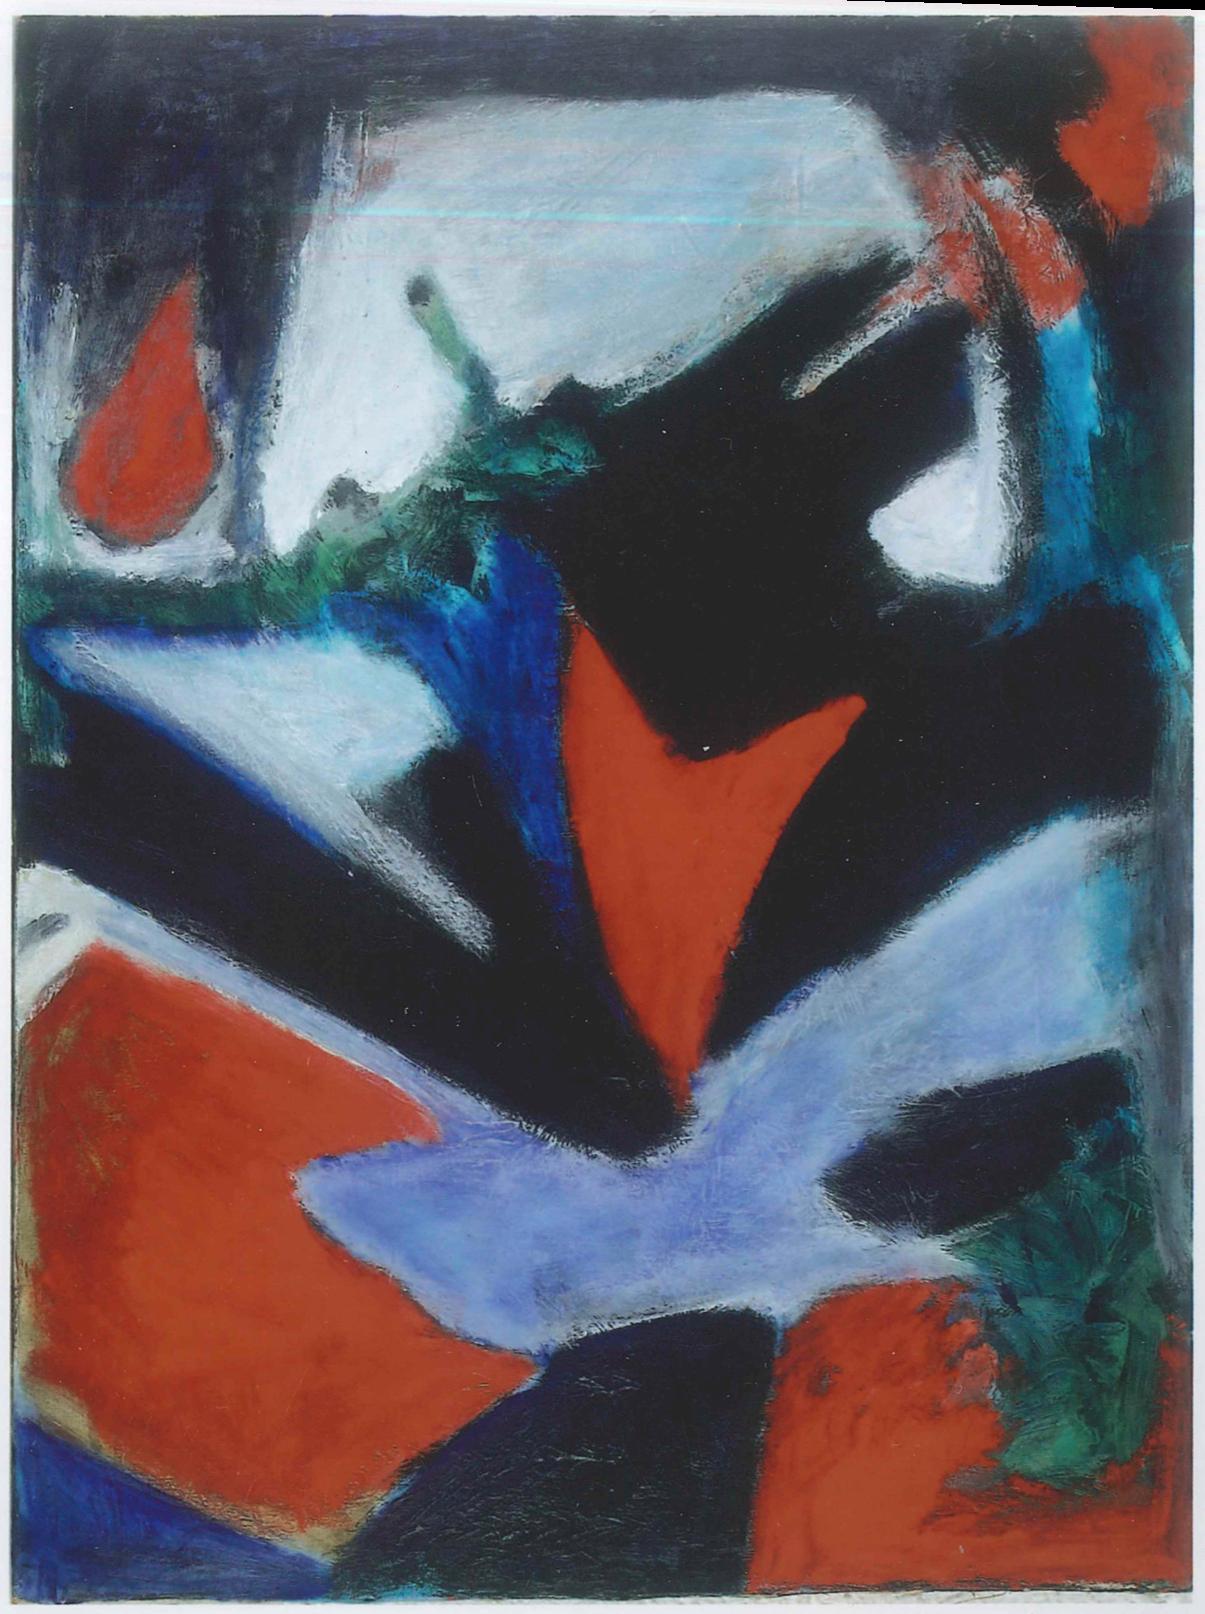 The Philosopher is an original artwork realized by Giorgio Lo Fermo in 1996.

Oil on canvas on canvas.

This contemporary abstract composition represents strong colors, the red and black, alternate with light tones of light blue and white.

Giorgio